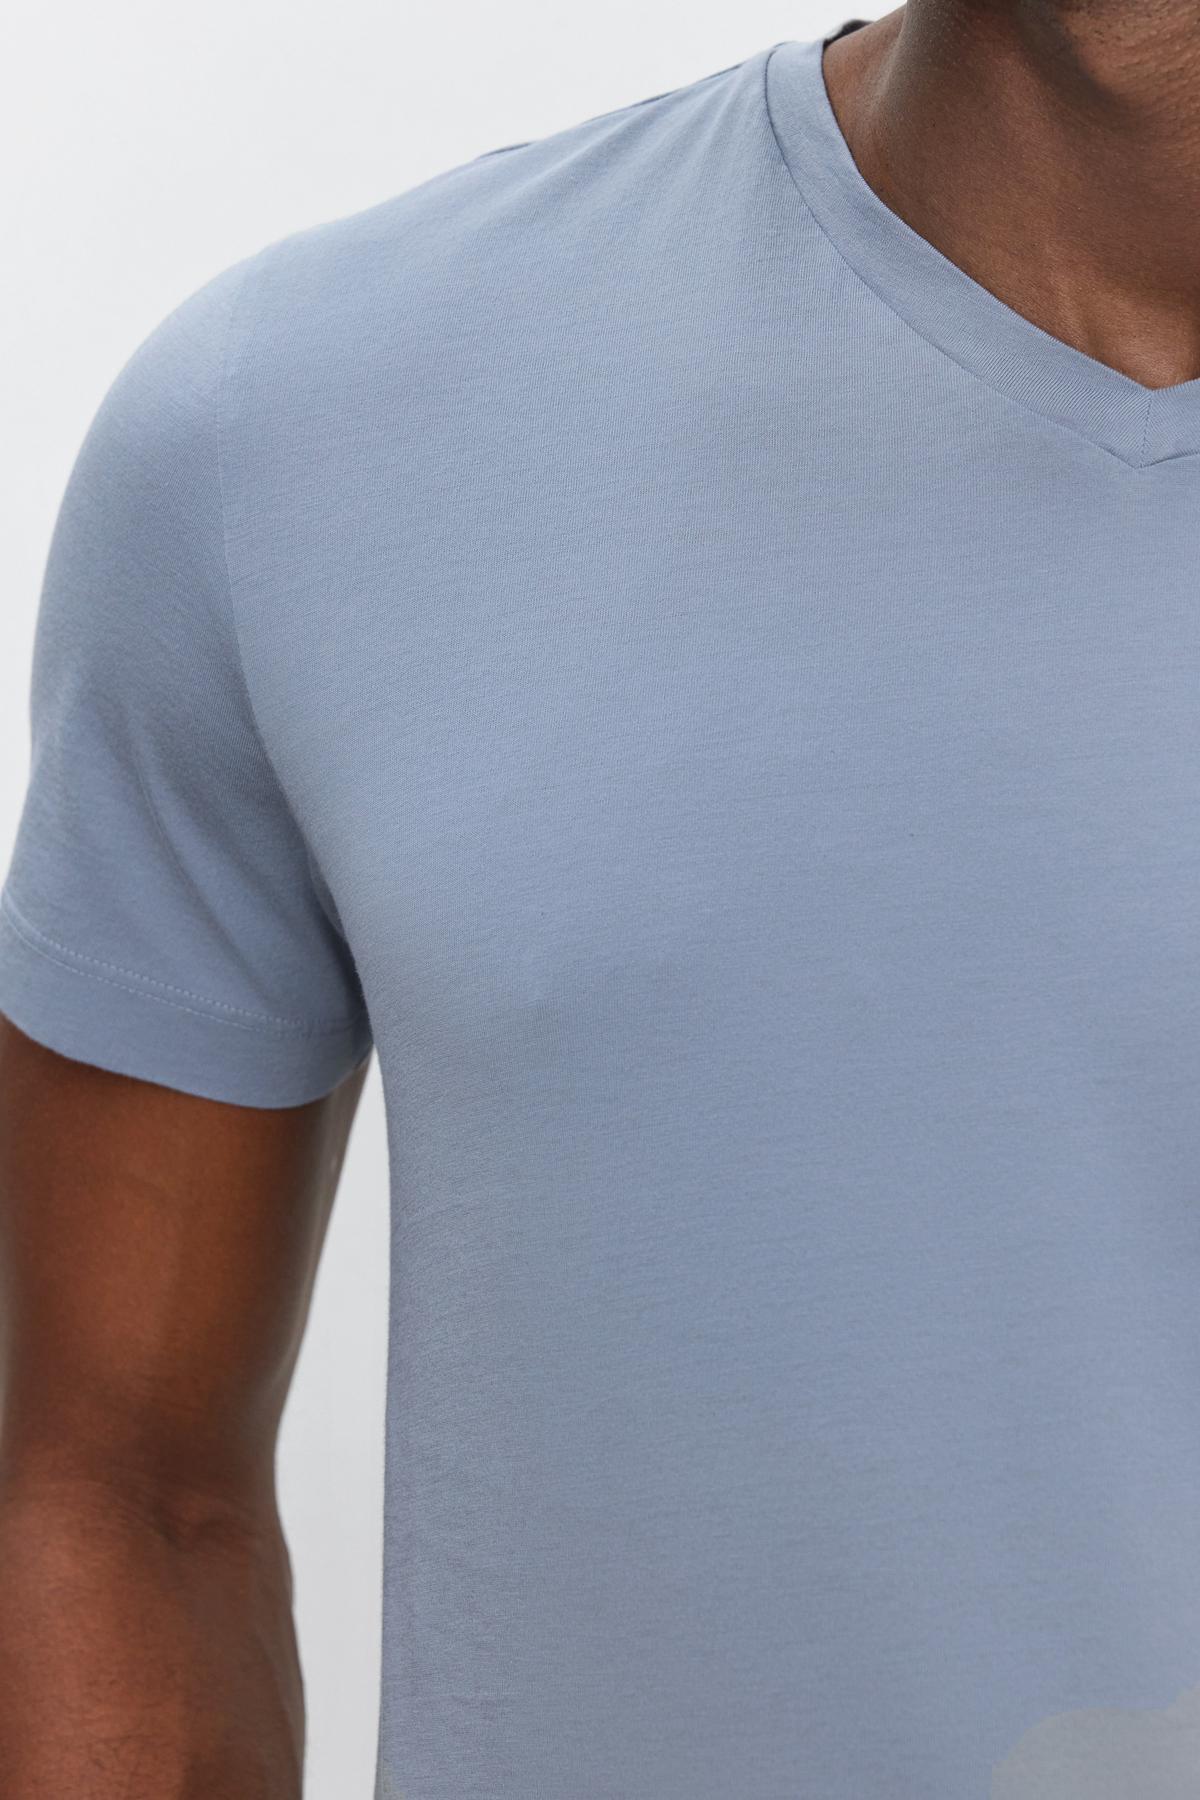 Close-up of a person wearing a SAMSEN TEE by Velvet by Graham & Spencer, showing part of the chest, shoulder, and upper arm against a white background. Perfect for everyday wear.-37386148741313